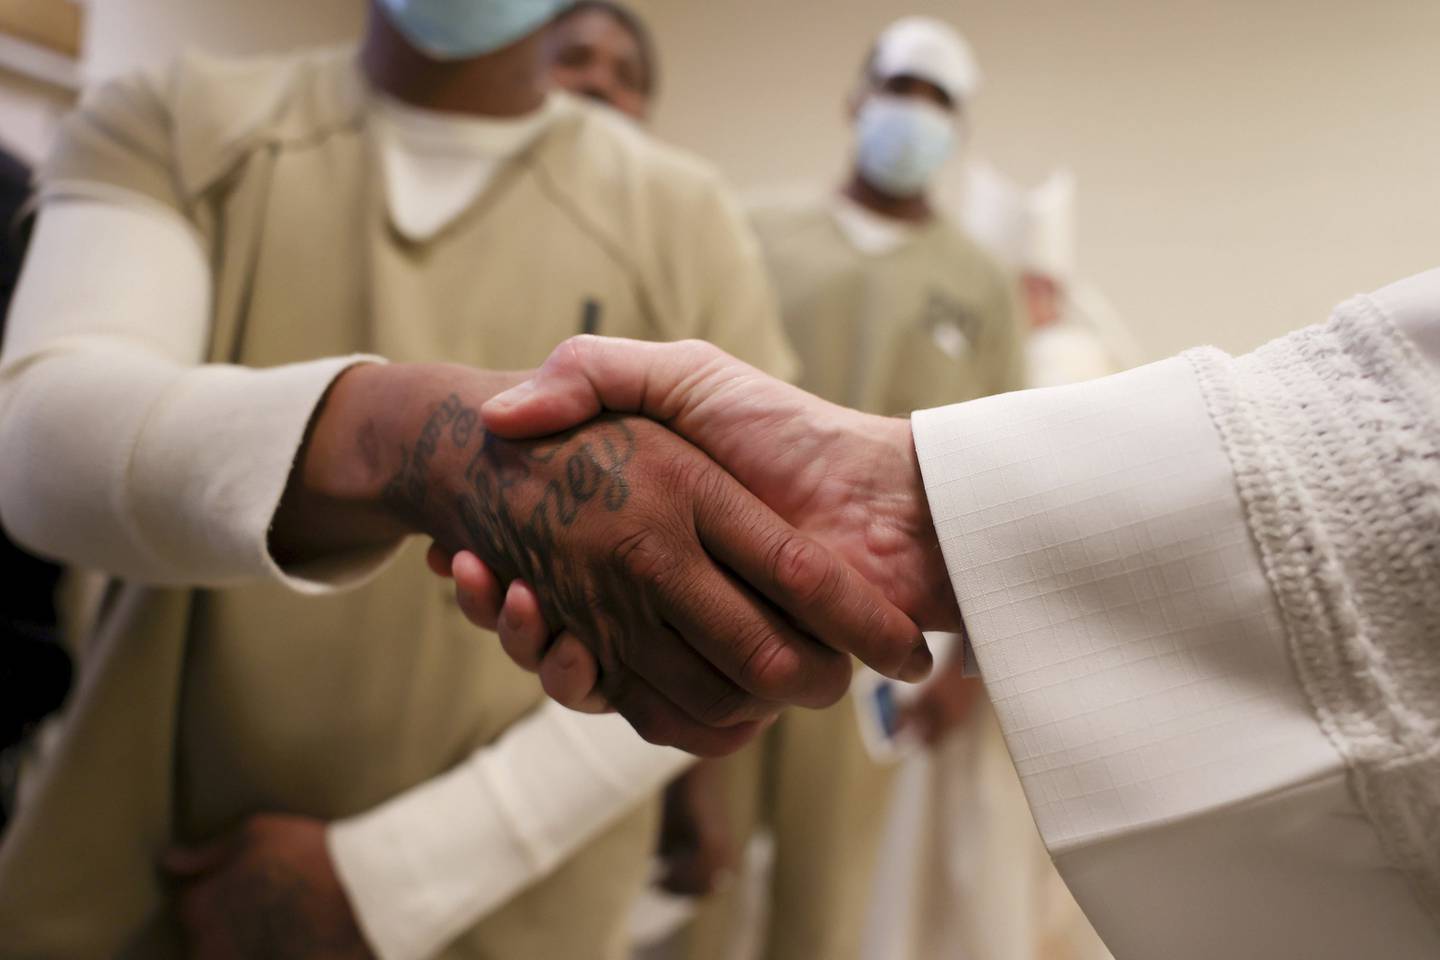 Deacon Tim McCormick shakes hands with men who are in custody at Cook County Jail. It was part of Cardinal Blase Cupich's annual Christmas Day visit to the jail. 